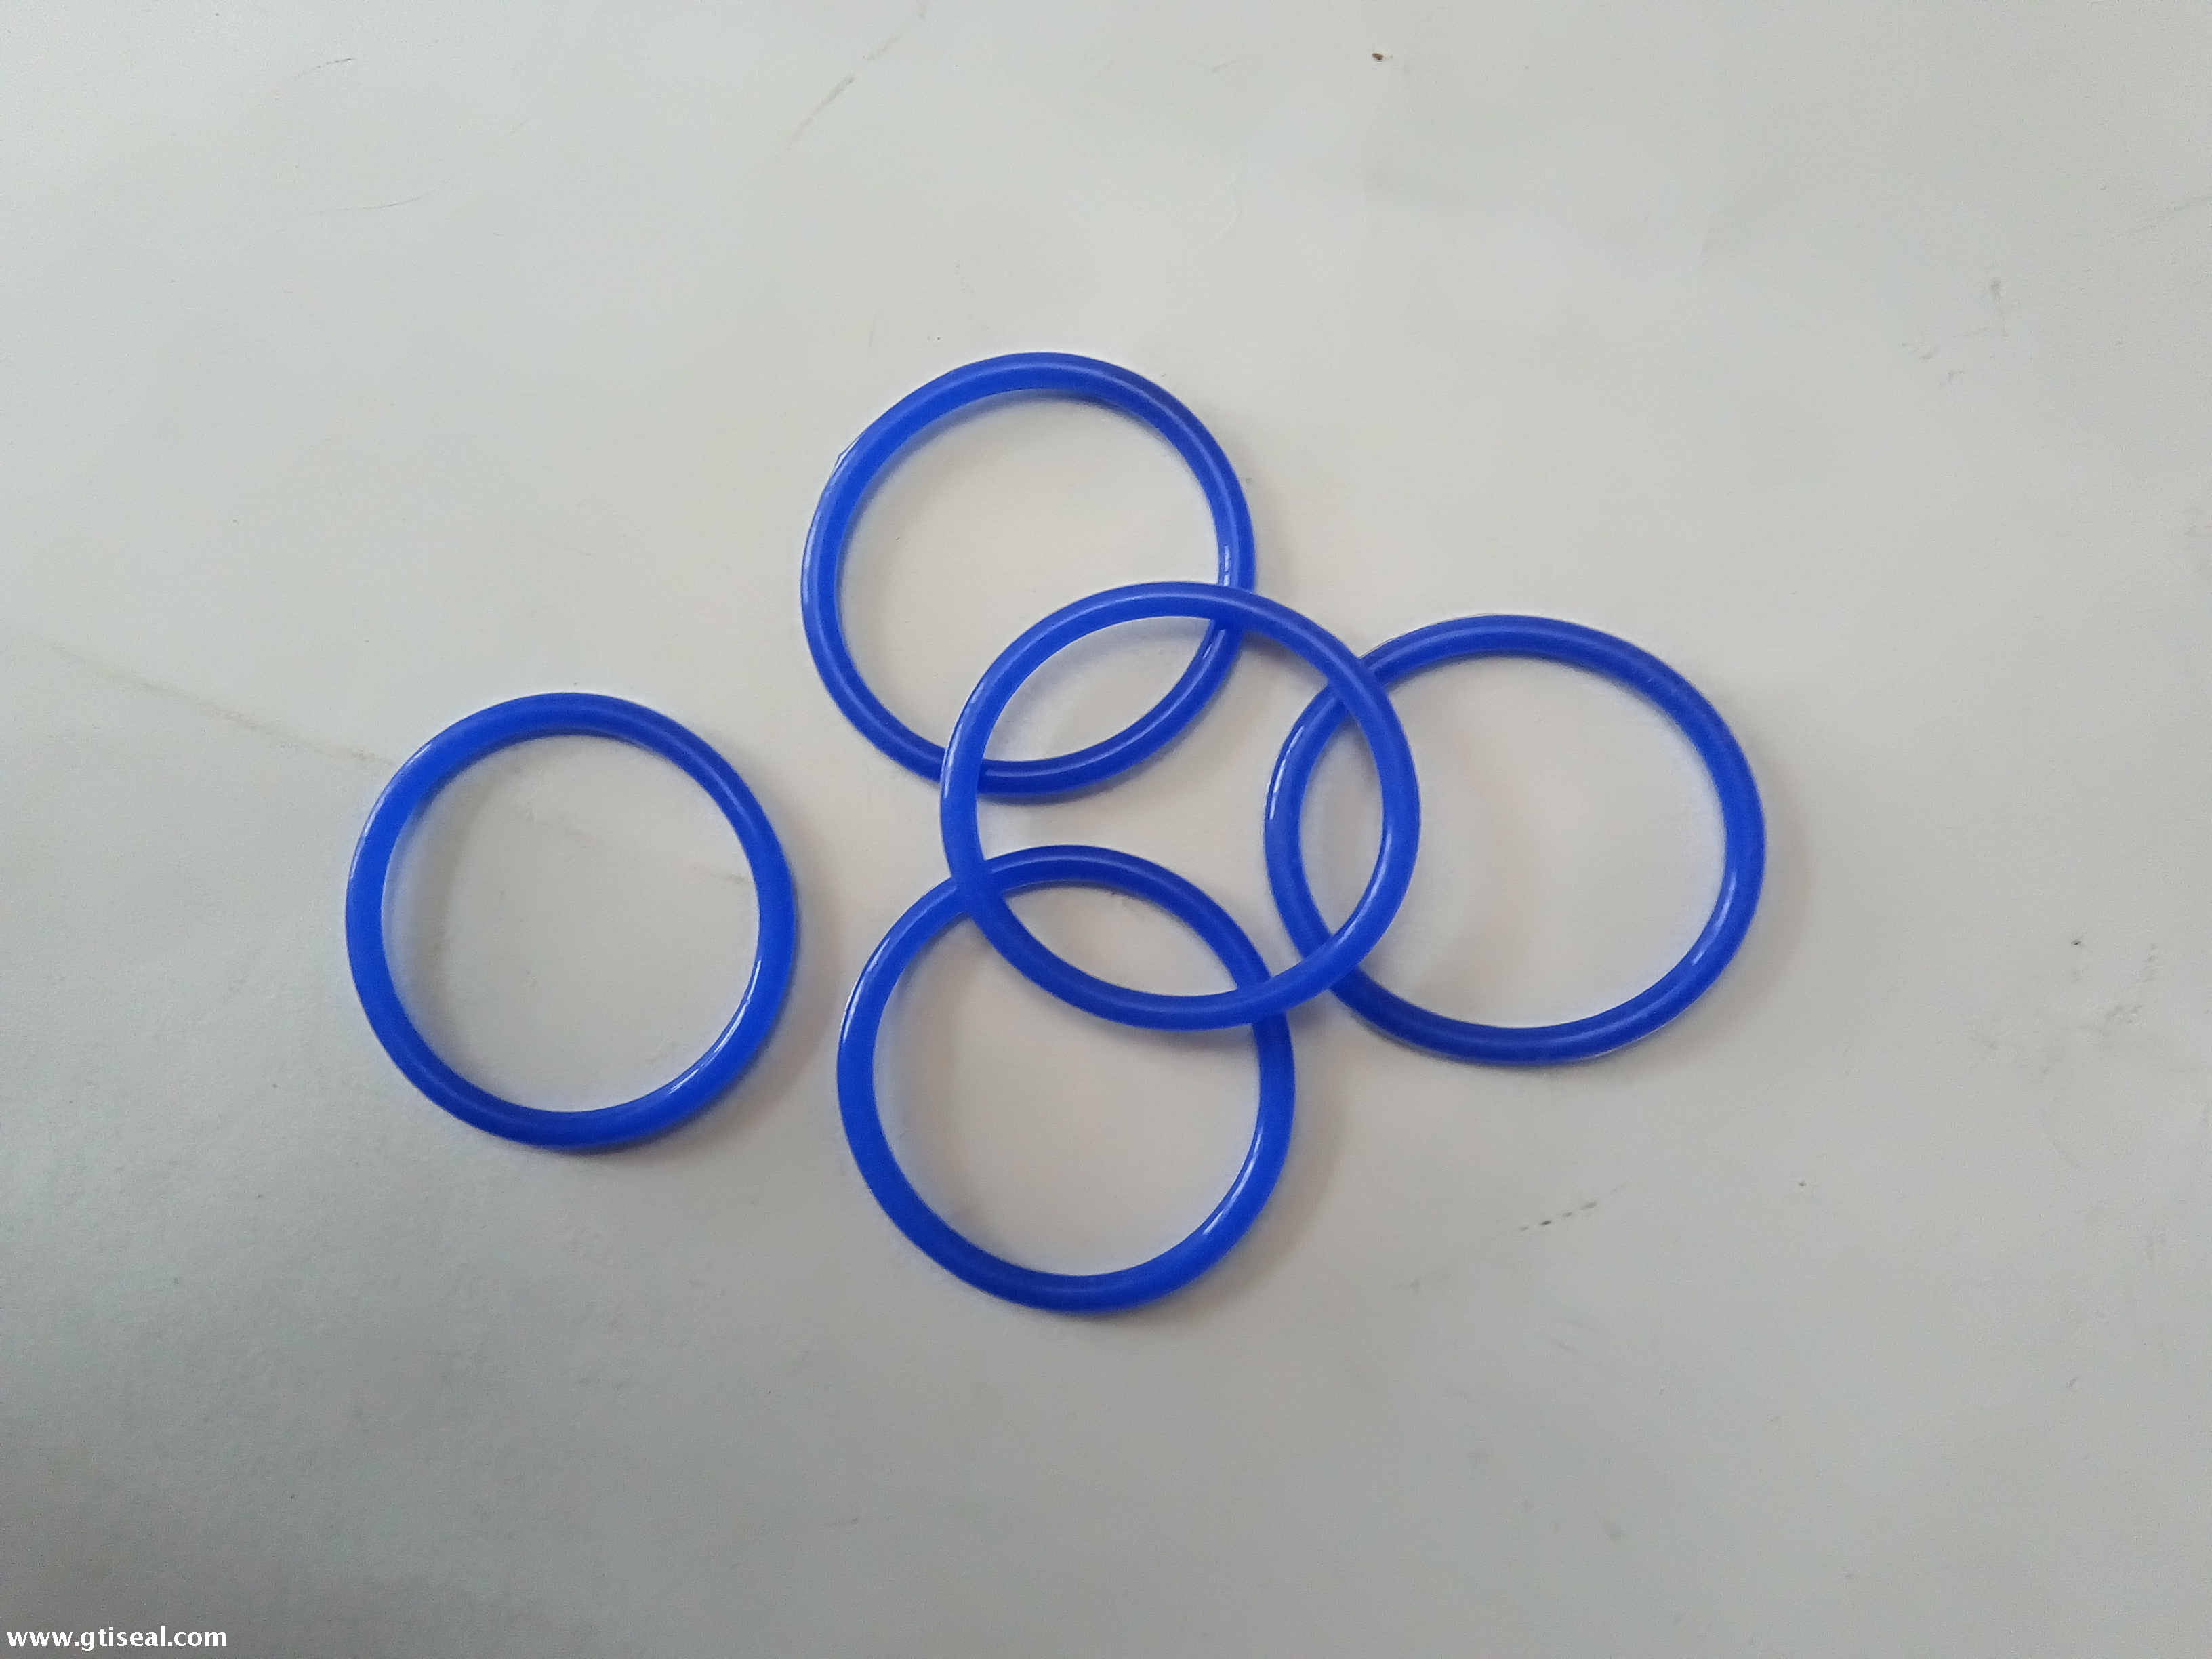 Blue silicone rubber o ring for sealing 